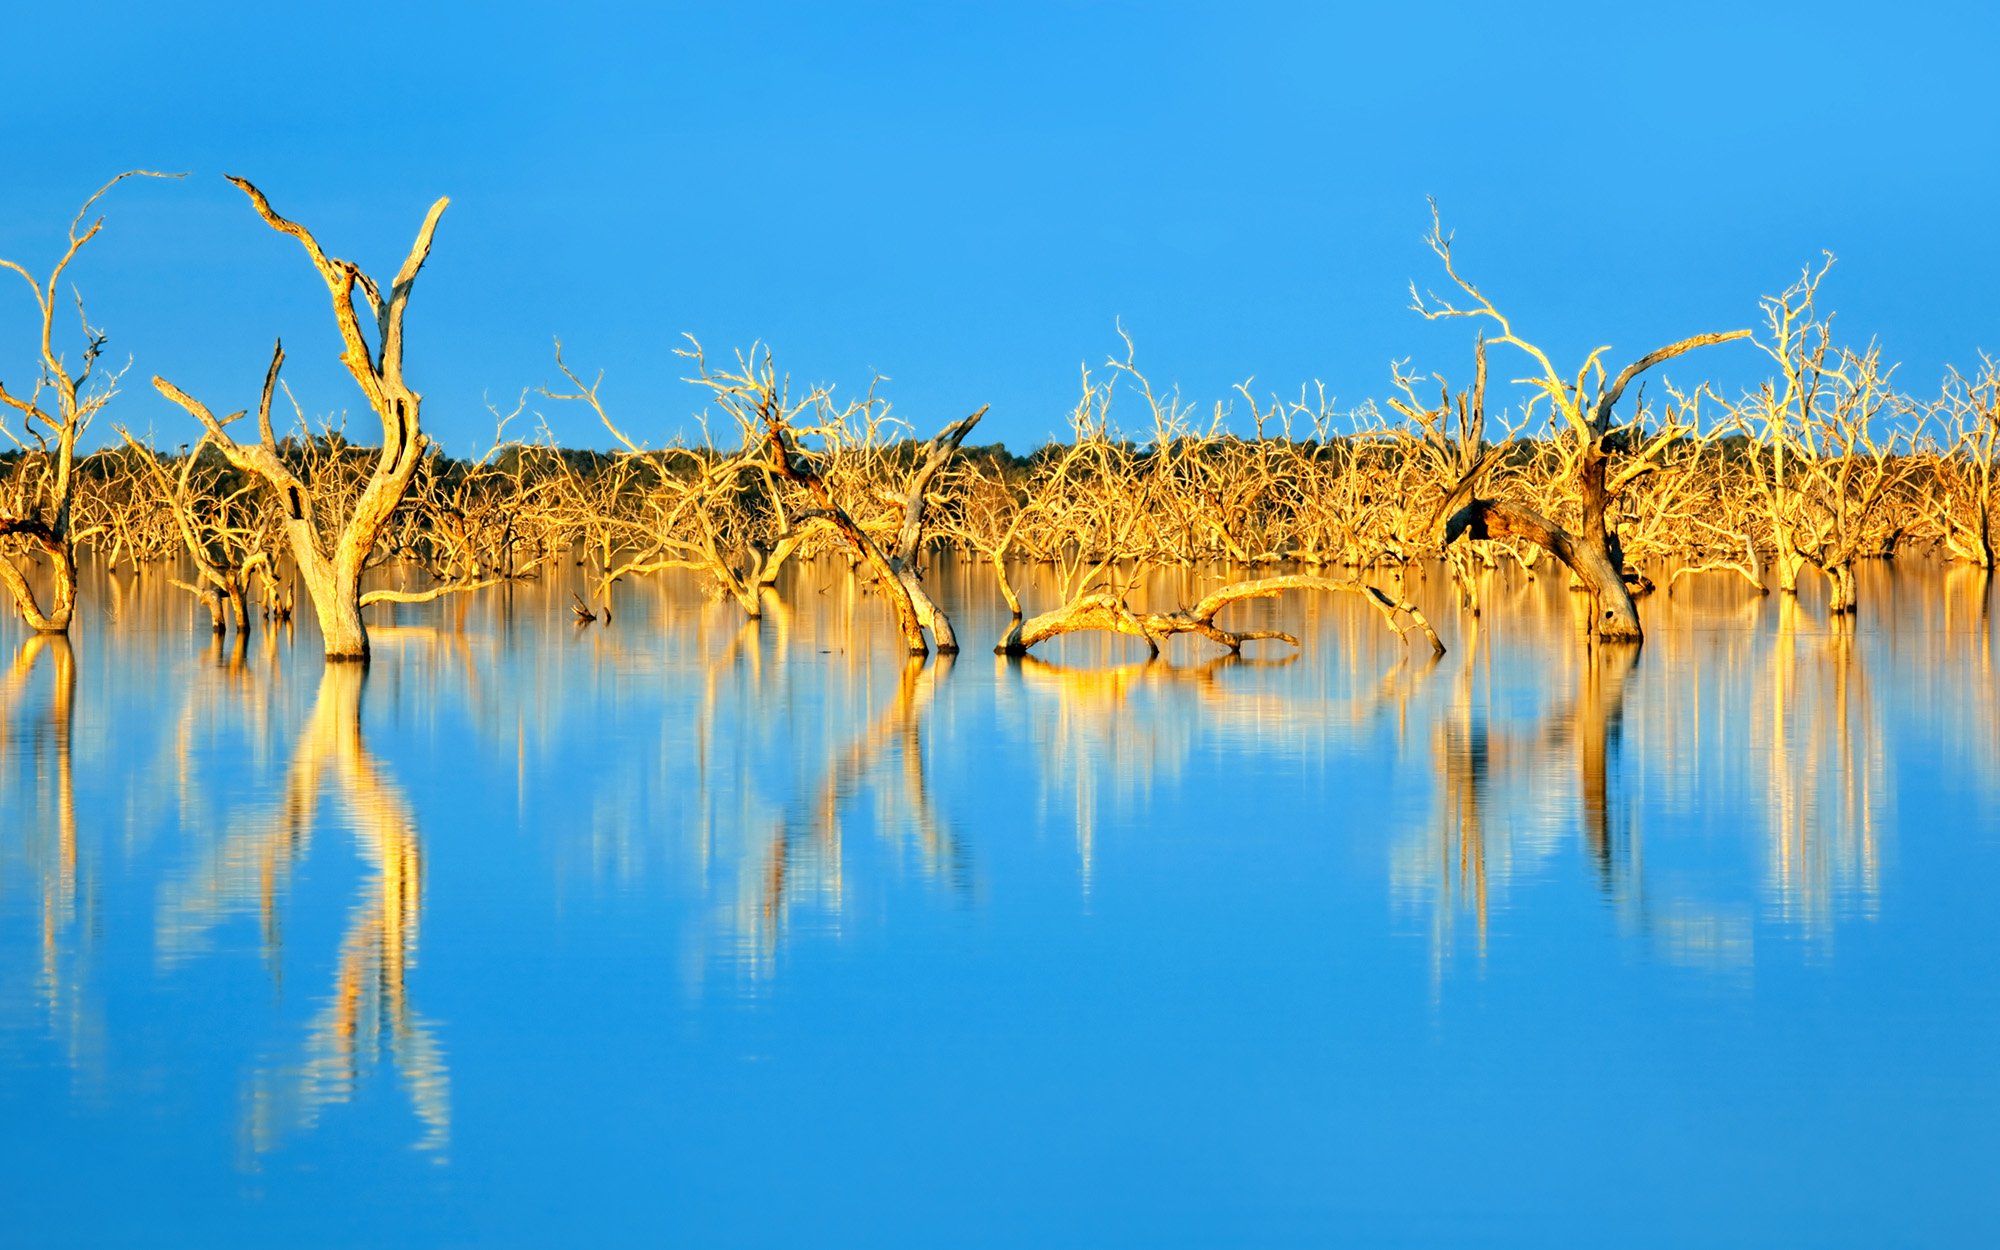 Trees submerged in man-made lake, in glorious sunset light.  Menindee, outback New South Wales, Australia.